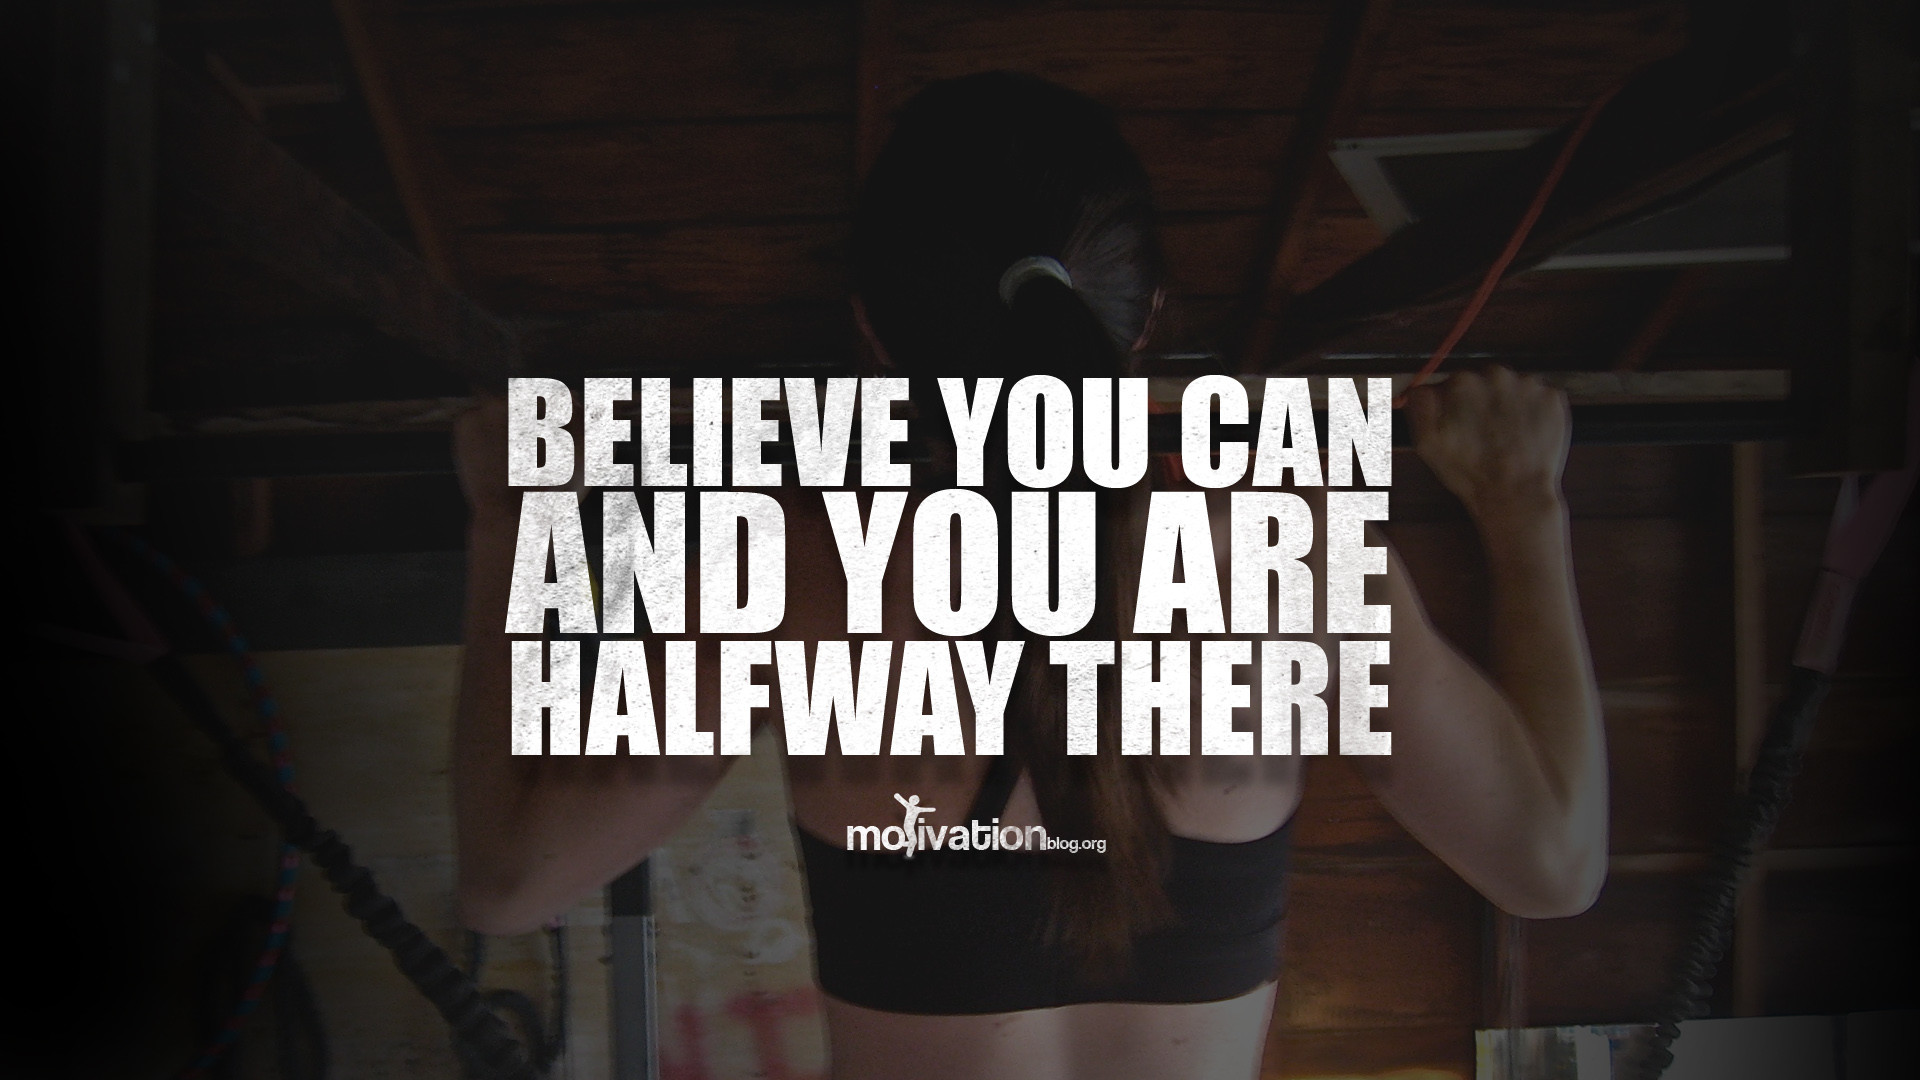 1920x1080 motivational workout wallpapers. Download this wallpaper. Check ...